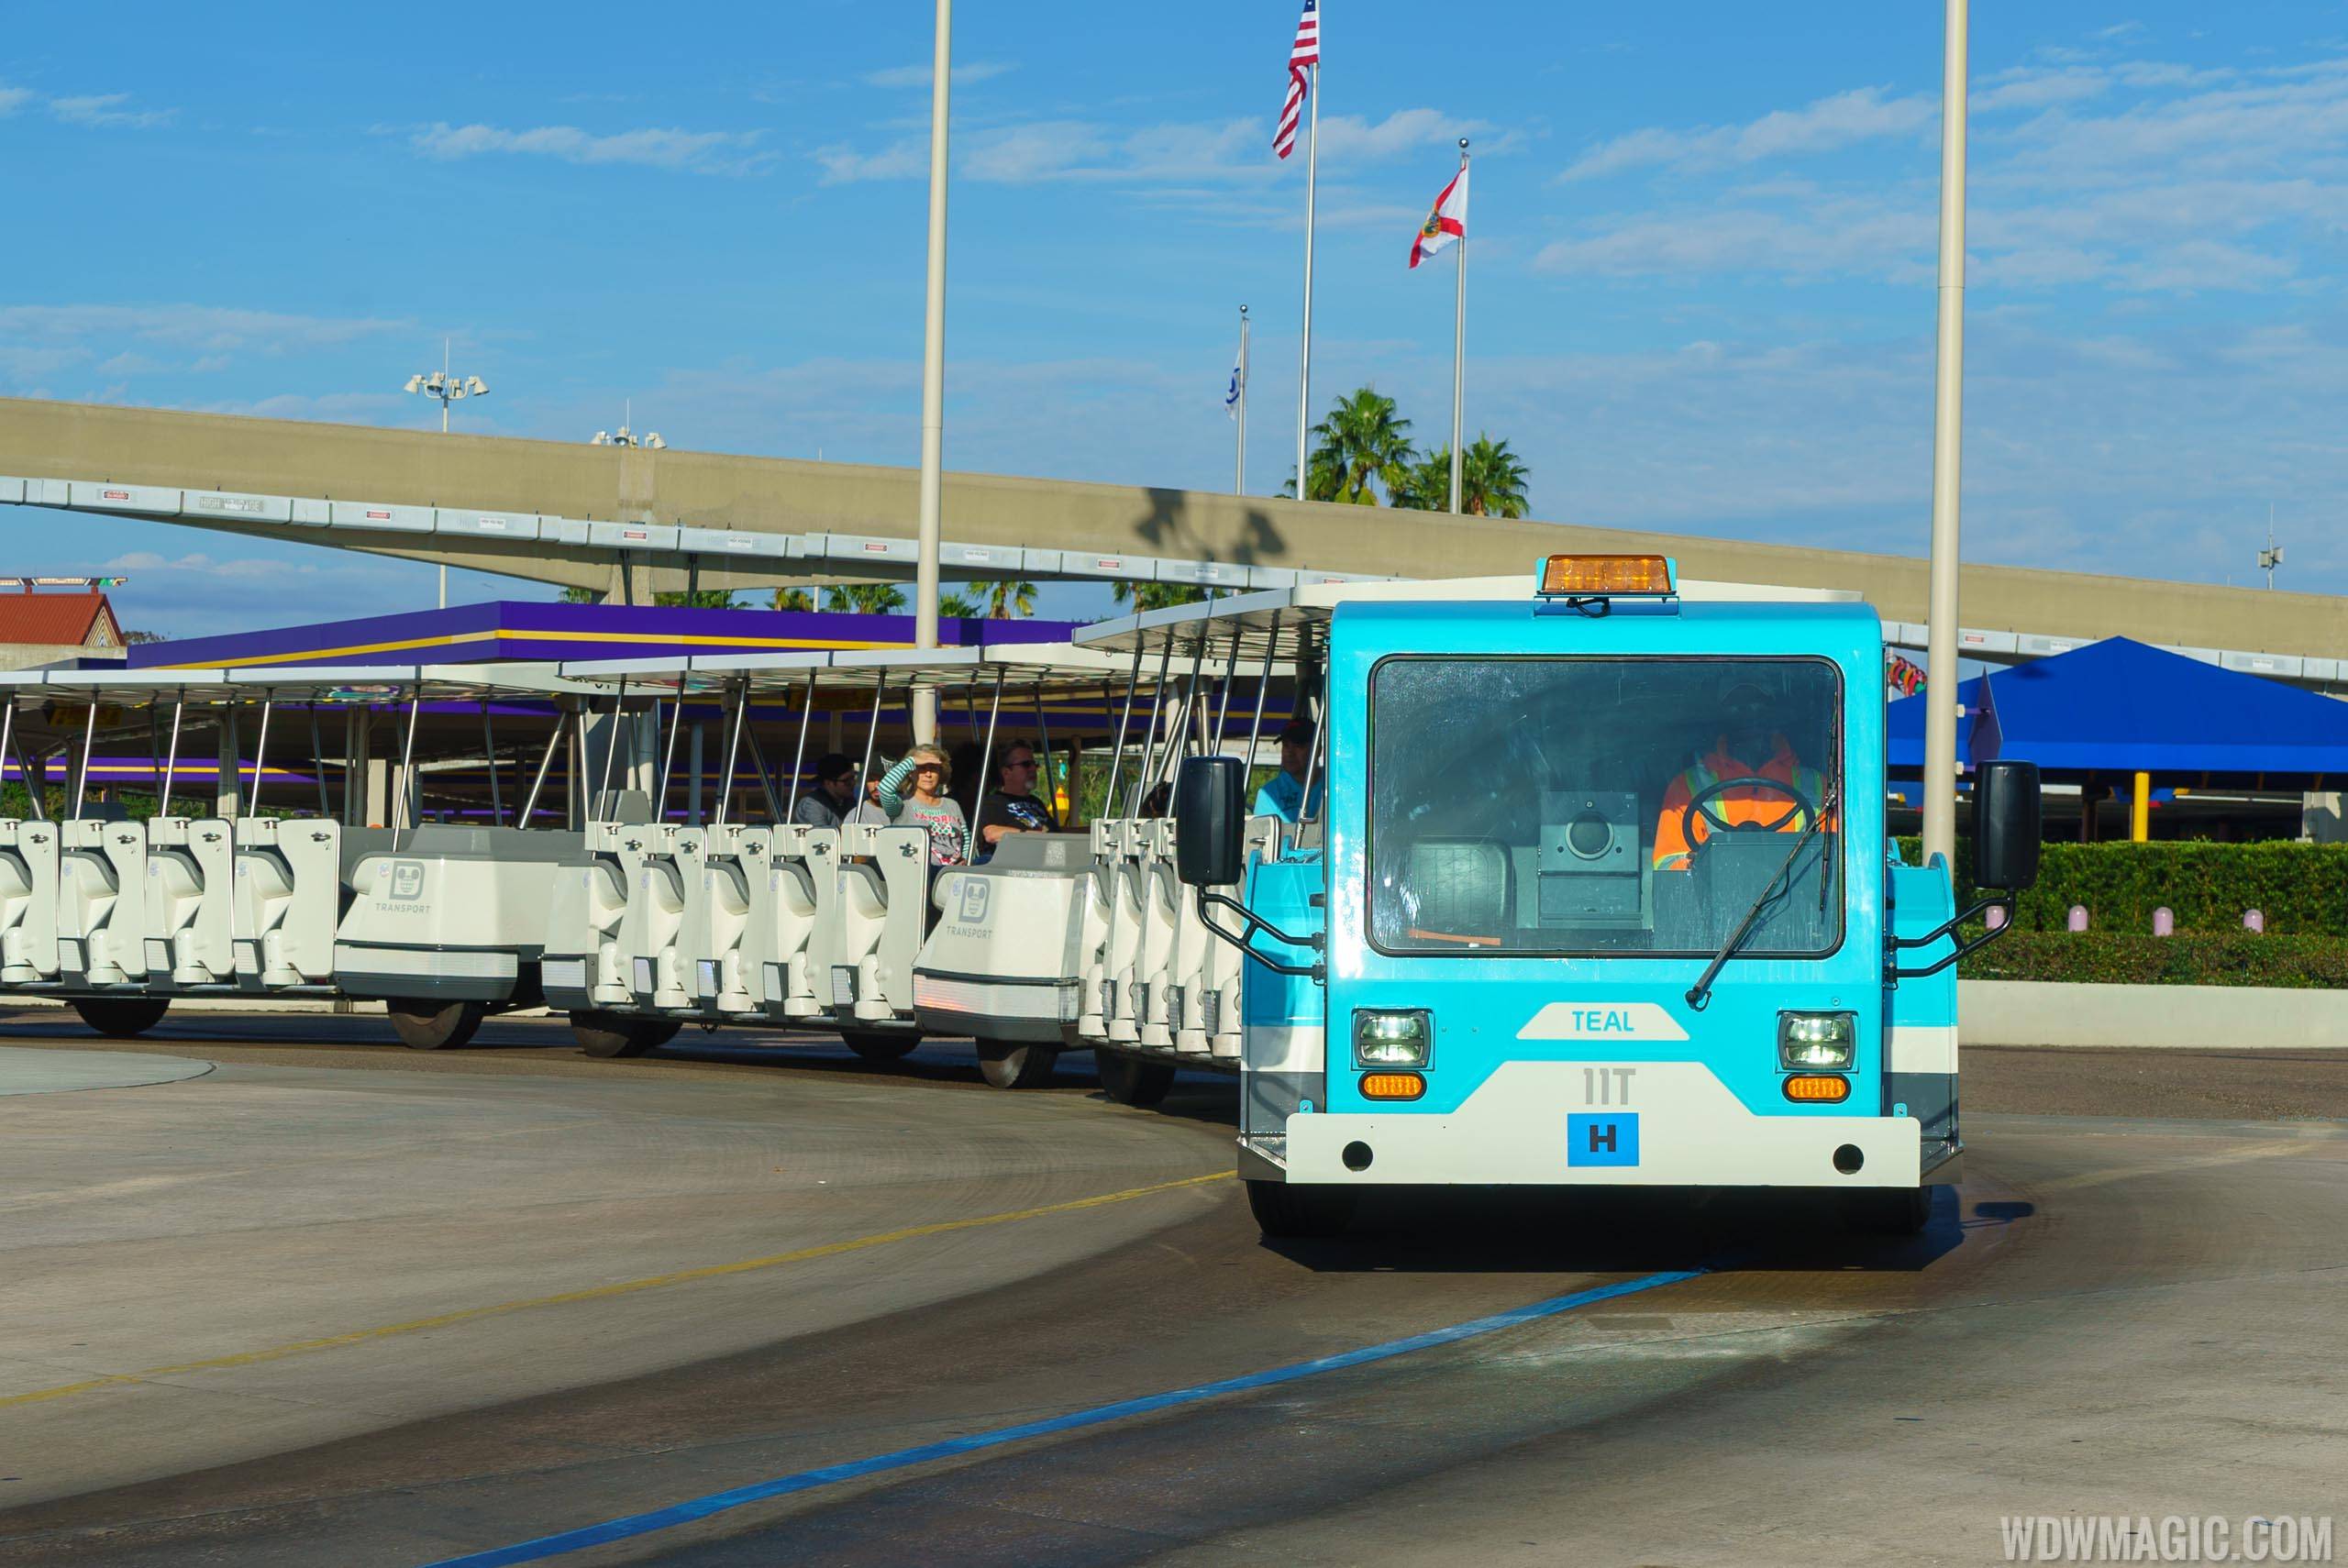 Parking Lot trams are back in service at Magic Kingdom